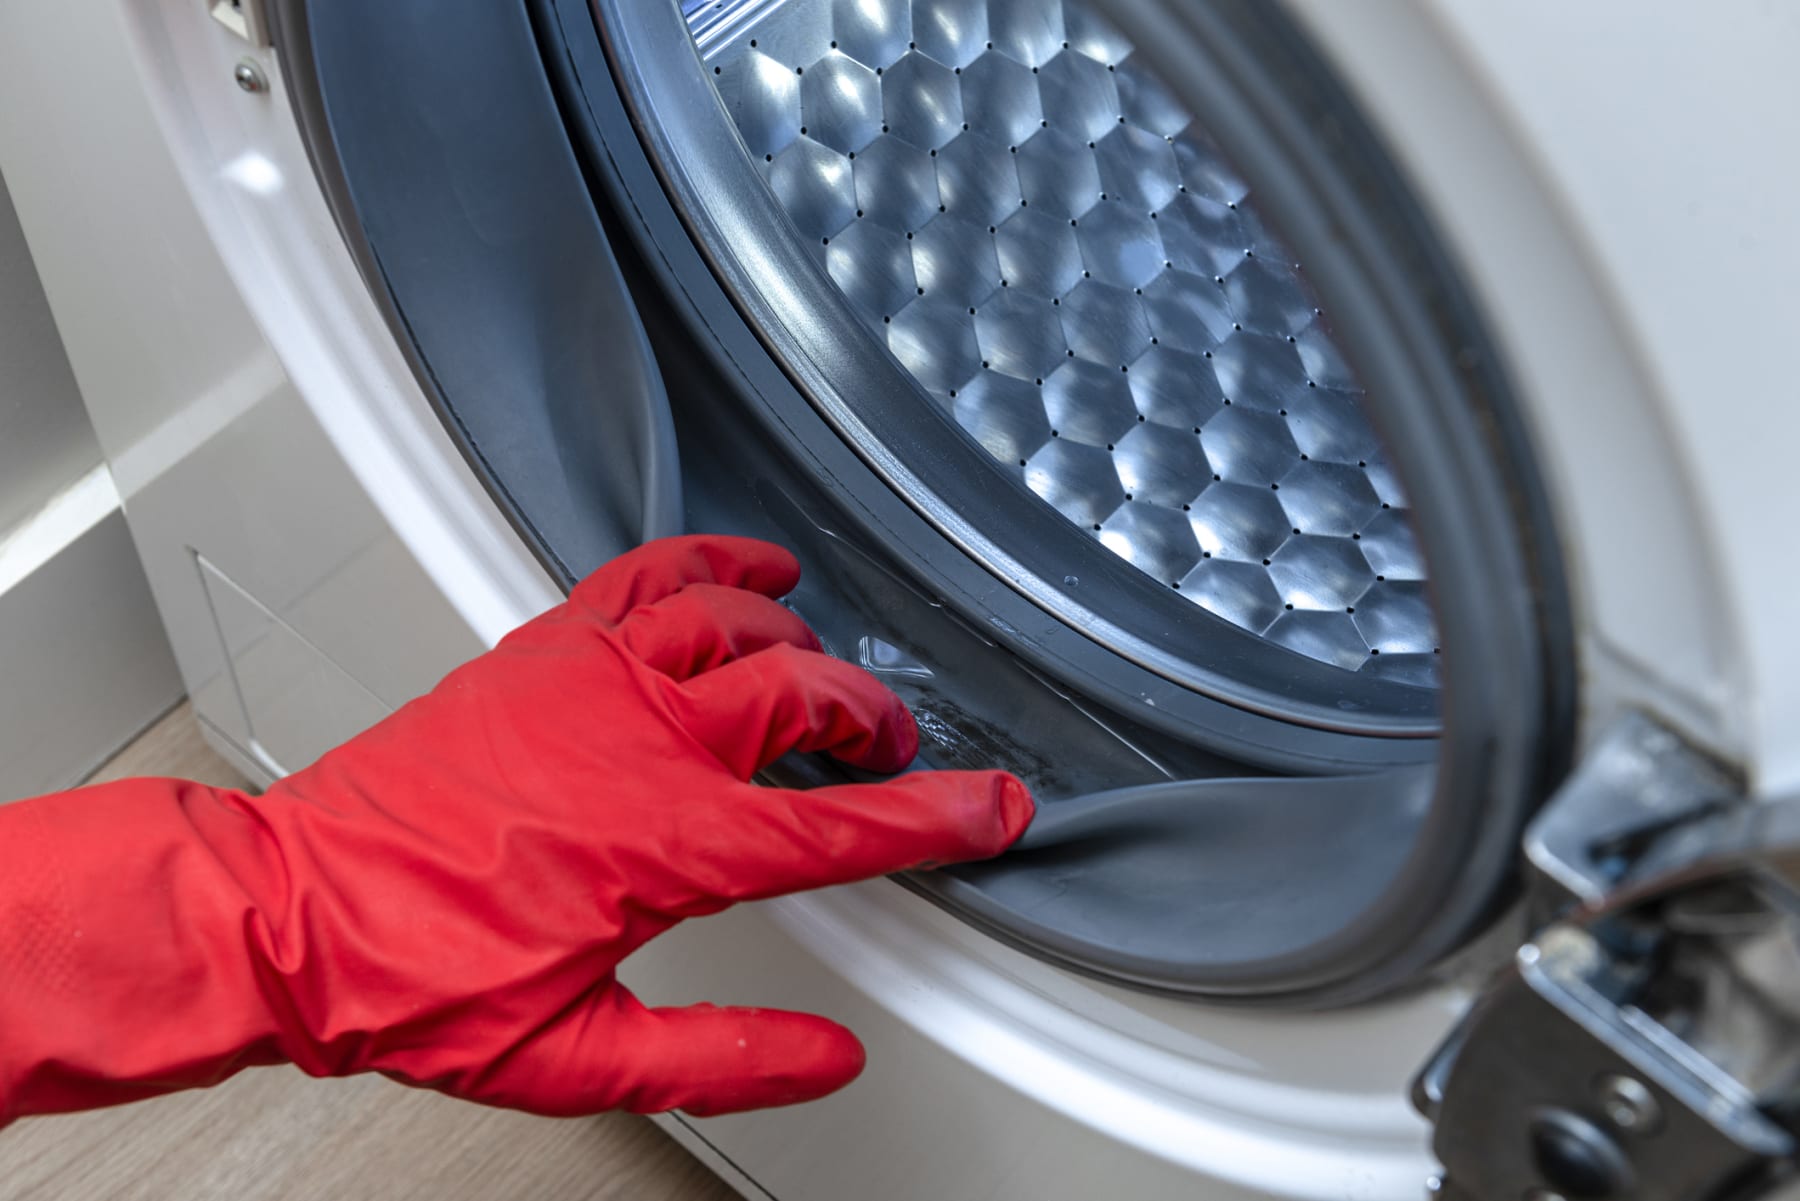 A gloved hand inspects a washer's rubber gasket